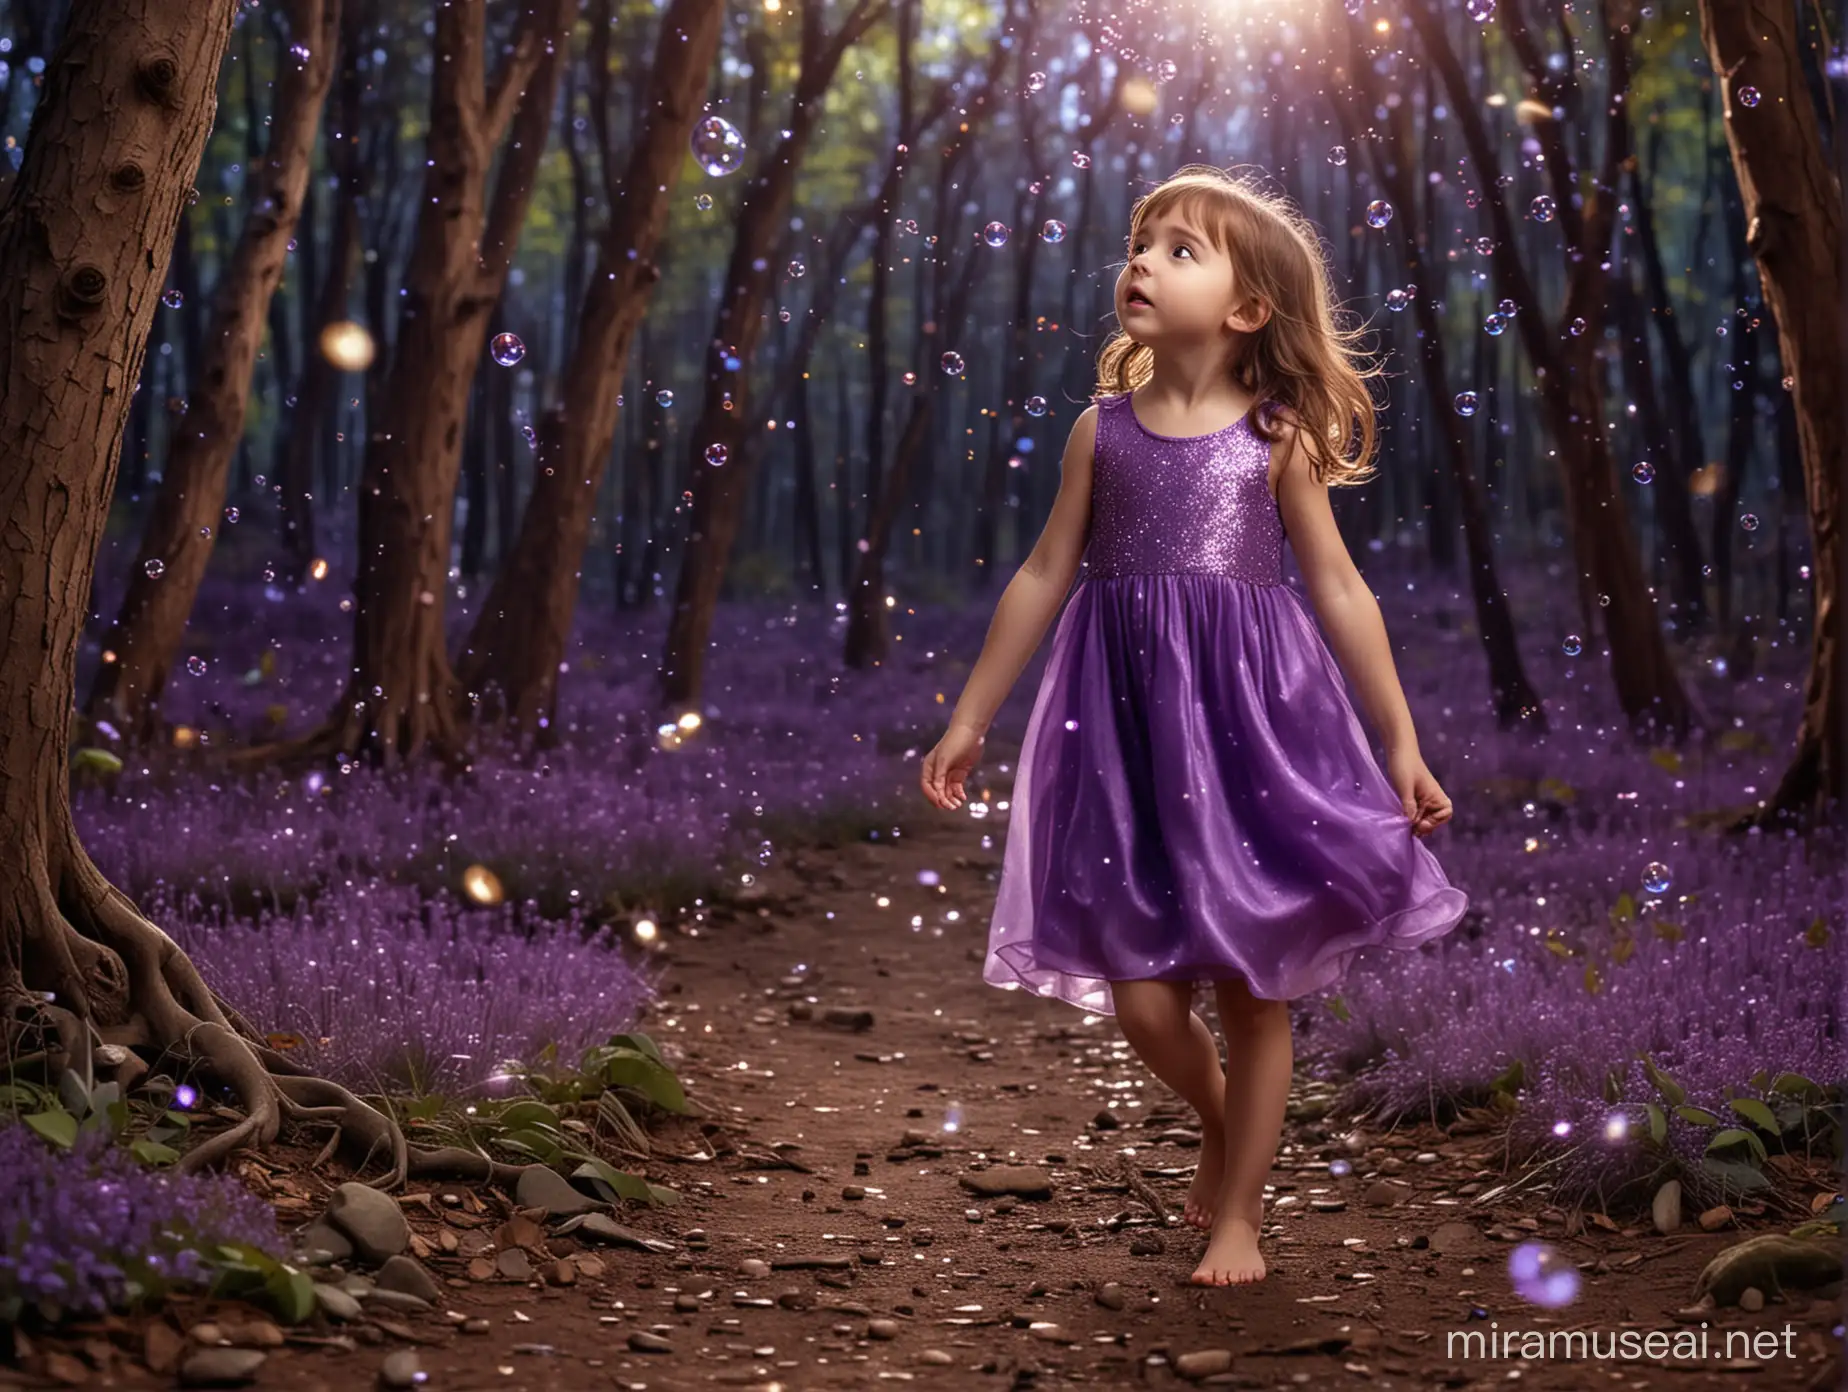 Surprised Little Girl in Shiny Purple Dress in Enchanted Forest at Night